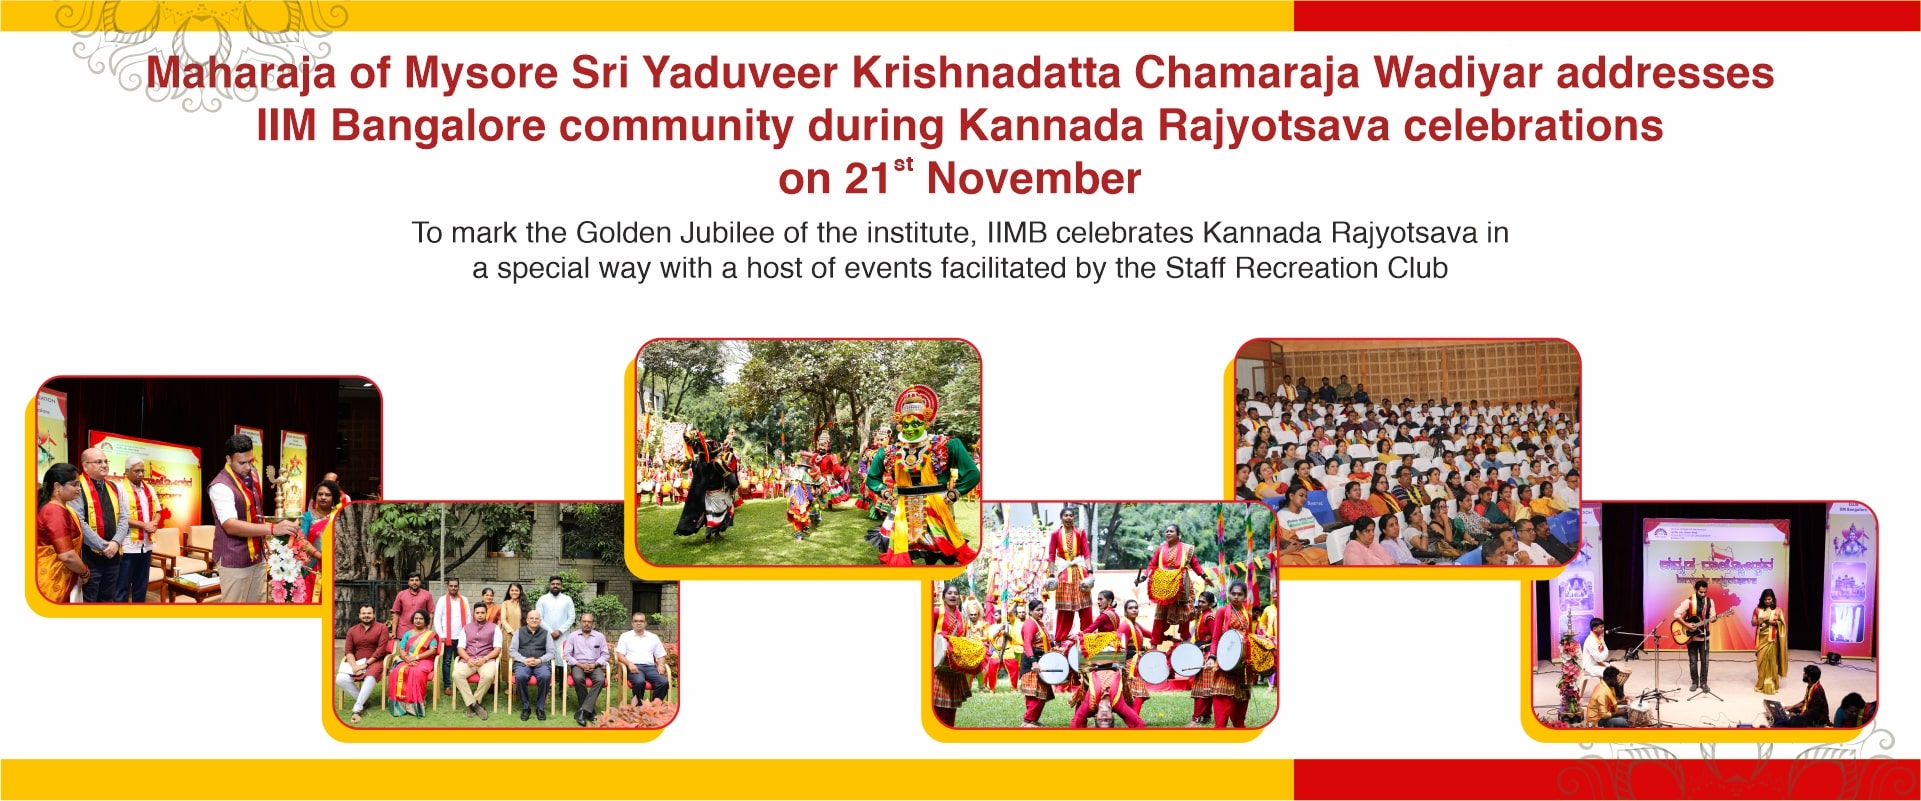  <p>     <span style="background-color:transparent;color:#000000;"><i>To mark the Golden Jubilee of the institute, IIMB celebrates Kannada Rajyotsava in a special way with a host of events facilitated by the Staff Recreation Club&nbsp;</i></span> </p> <p>     <span style="background-color:transparent;color:#000000;"><strong>21 November, 2023, Bengaluru:</strong> “IIM Bangalore, through its campus, infrastructure and ambience, truly reflects the essence of old Bangalore, the city that once was. IIMB is not a